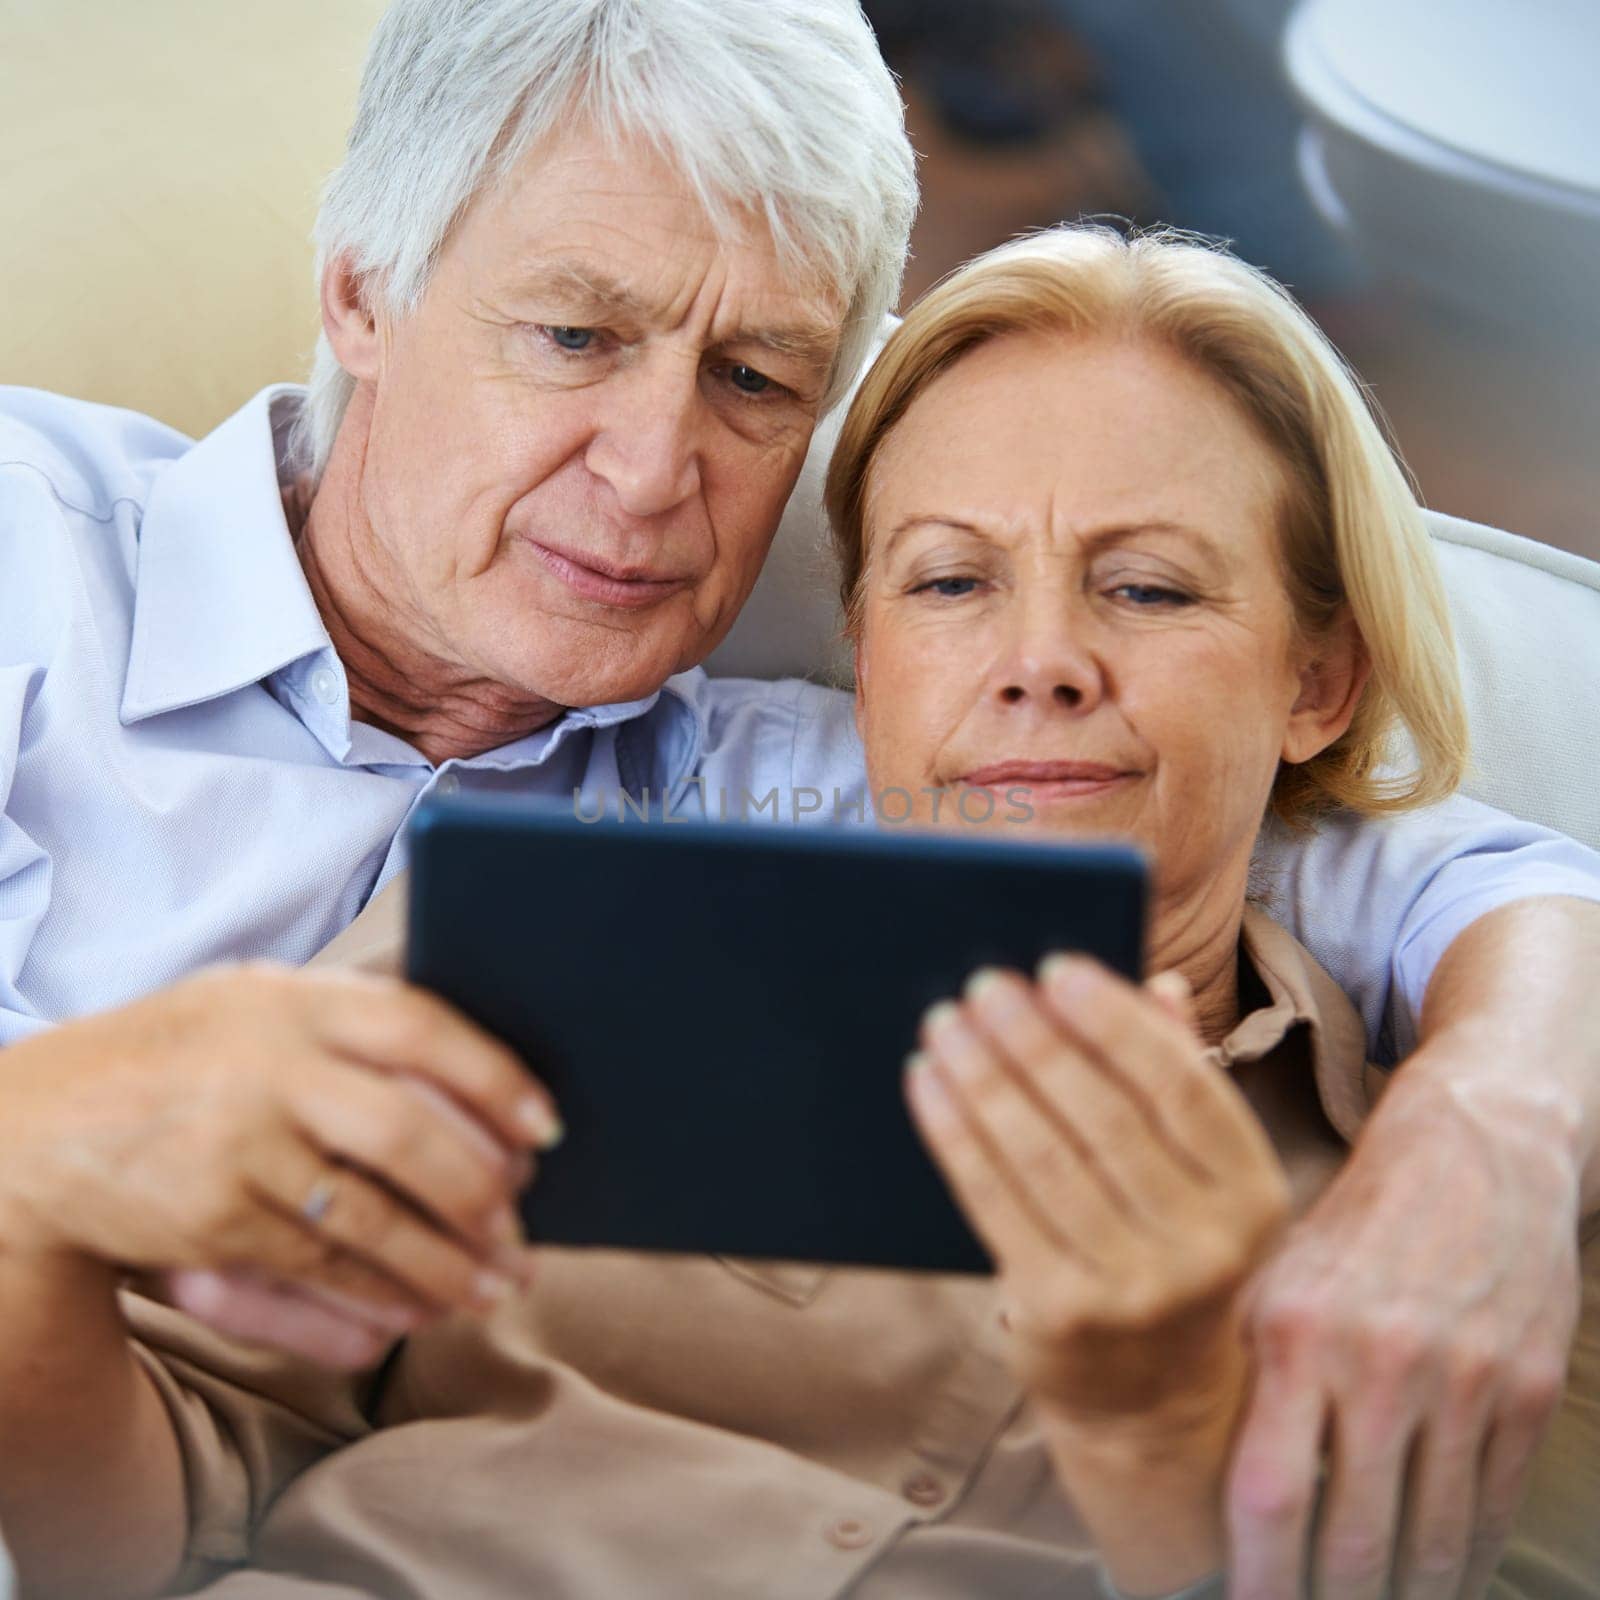 Making the cozy connection. a happy elderly couple watching something on a digital tablet while relaxing on their sofa